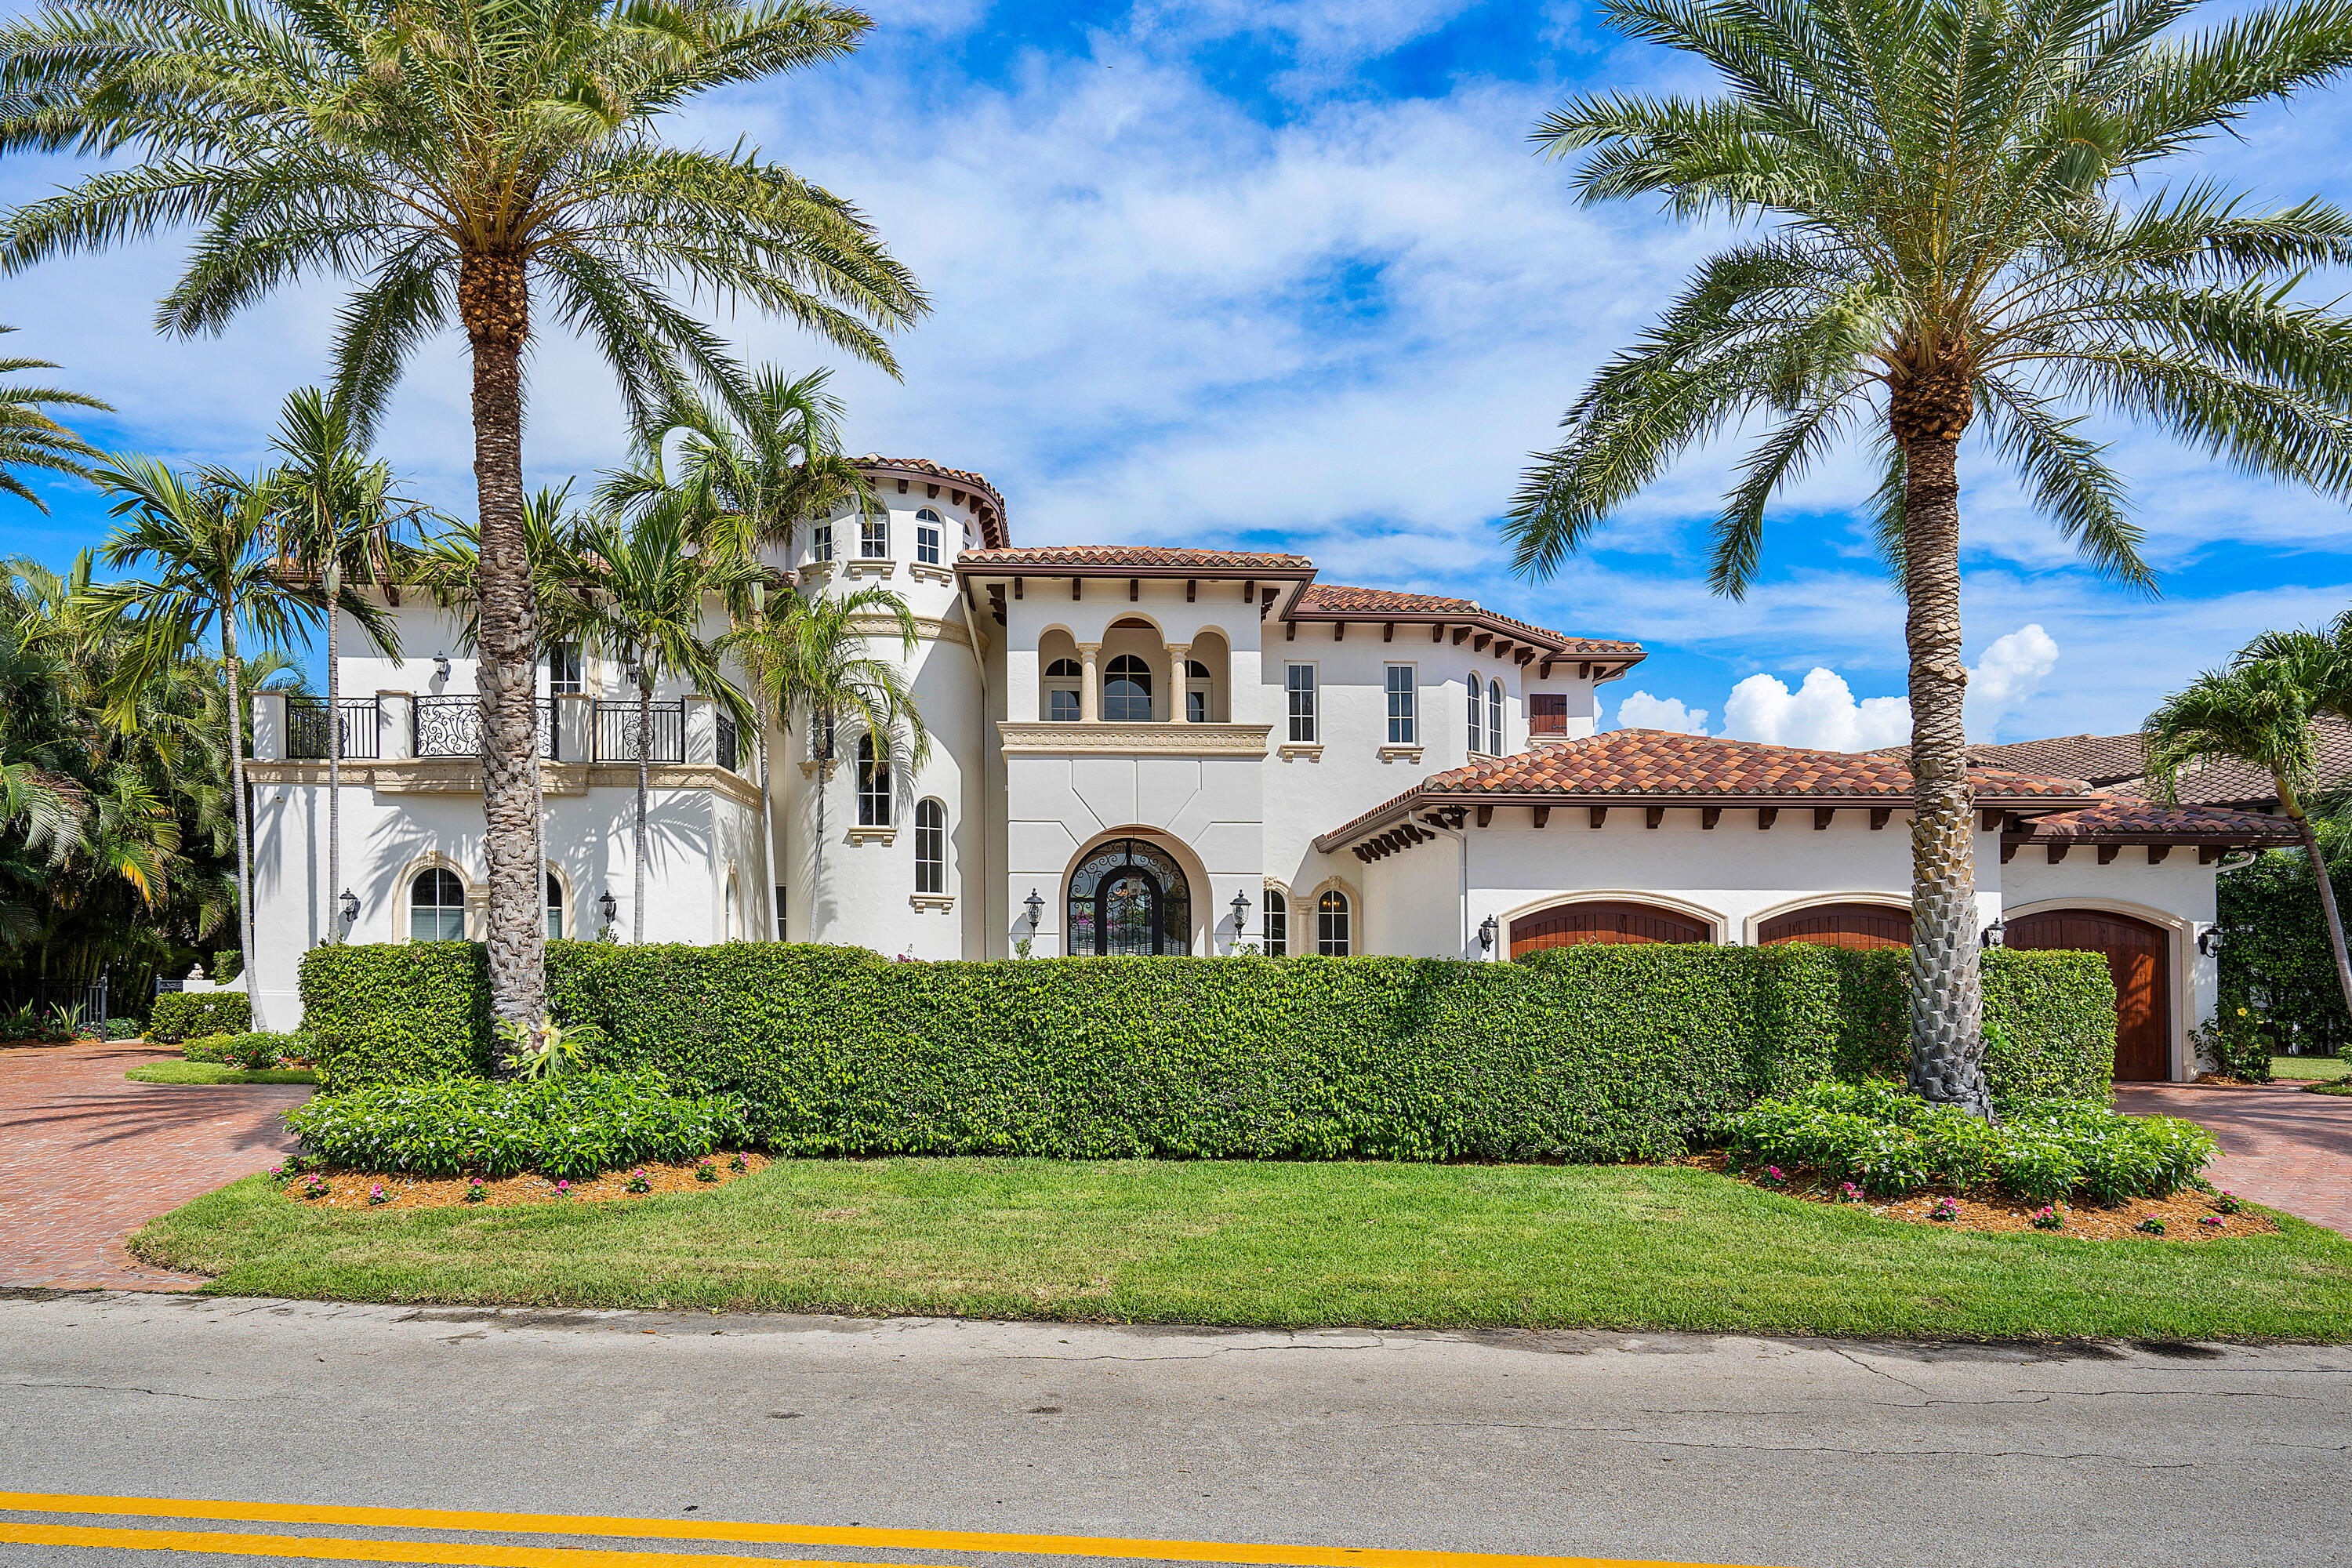 Property for Sale at 747 Marble Way, Boca Raton, Palm Beach County, Florida - Bedrooms: 6 
Bathrooms: 5.5  - $7,850,000